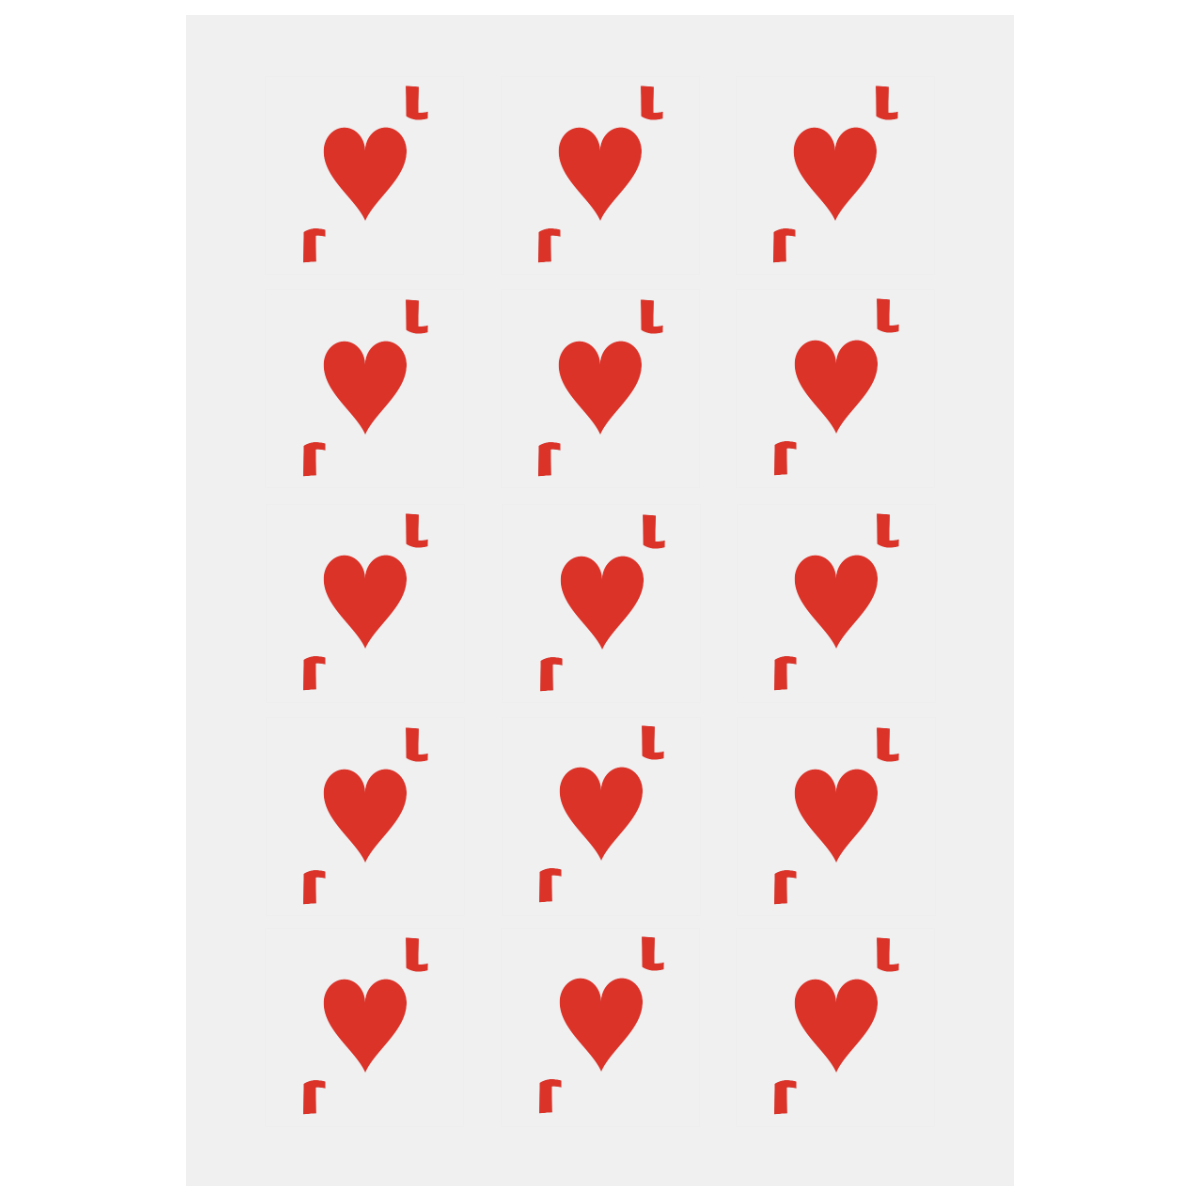 Playing Card Jack of Hearts Personalized Temporary Tattoo (15 Pieces)